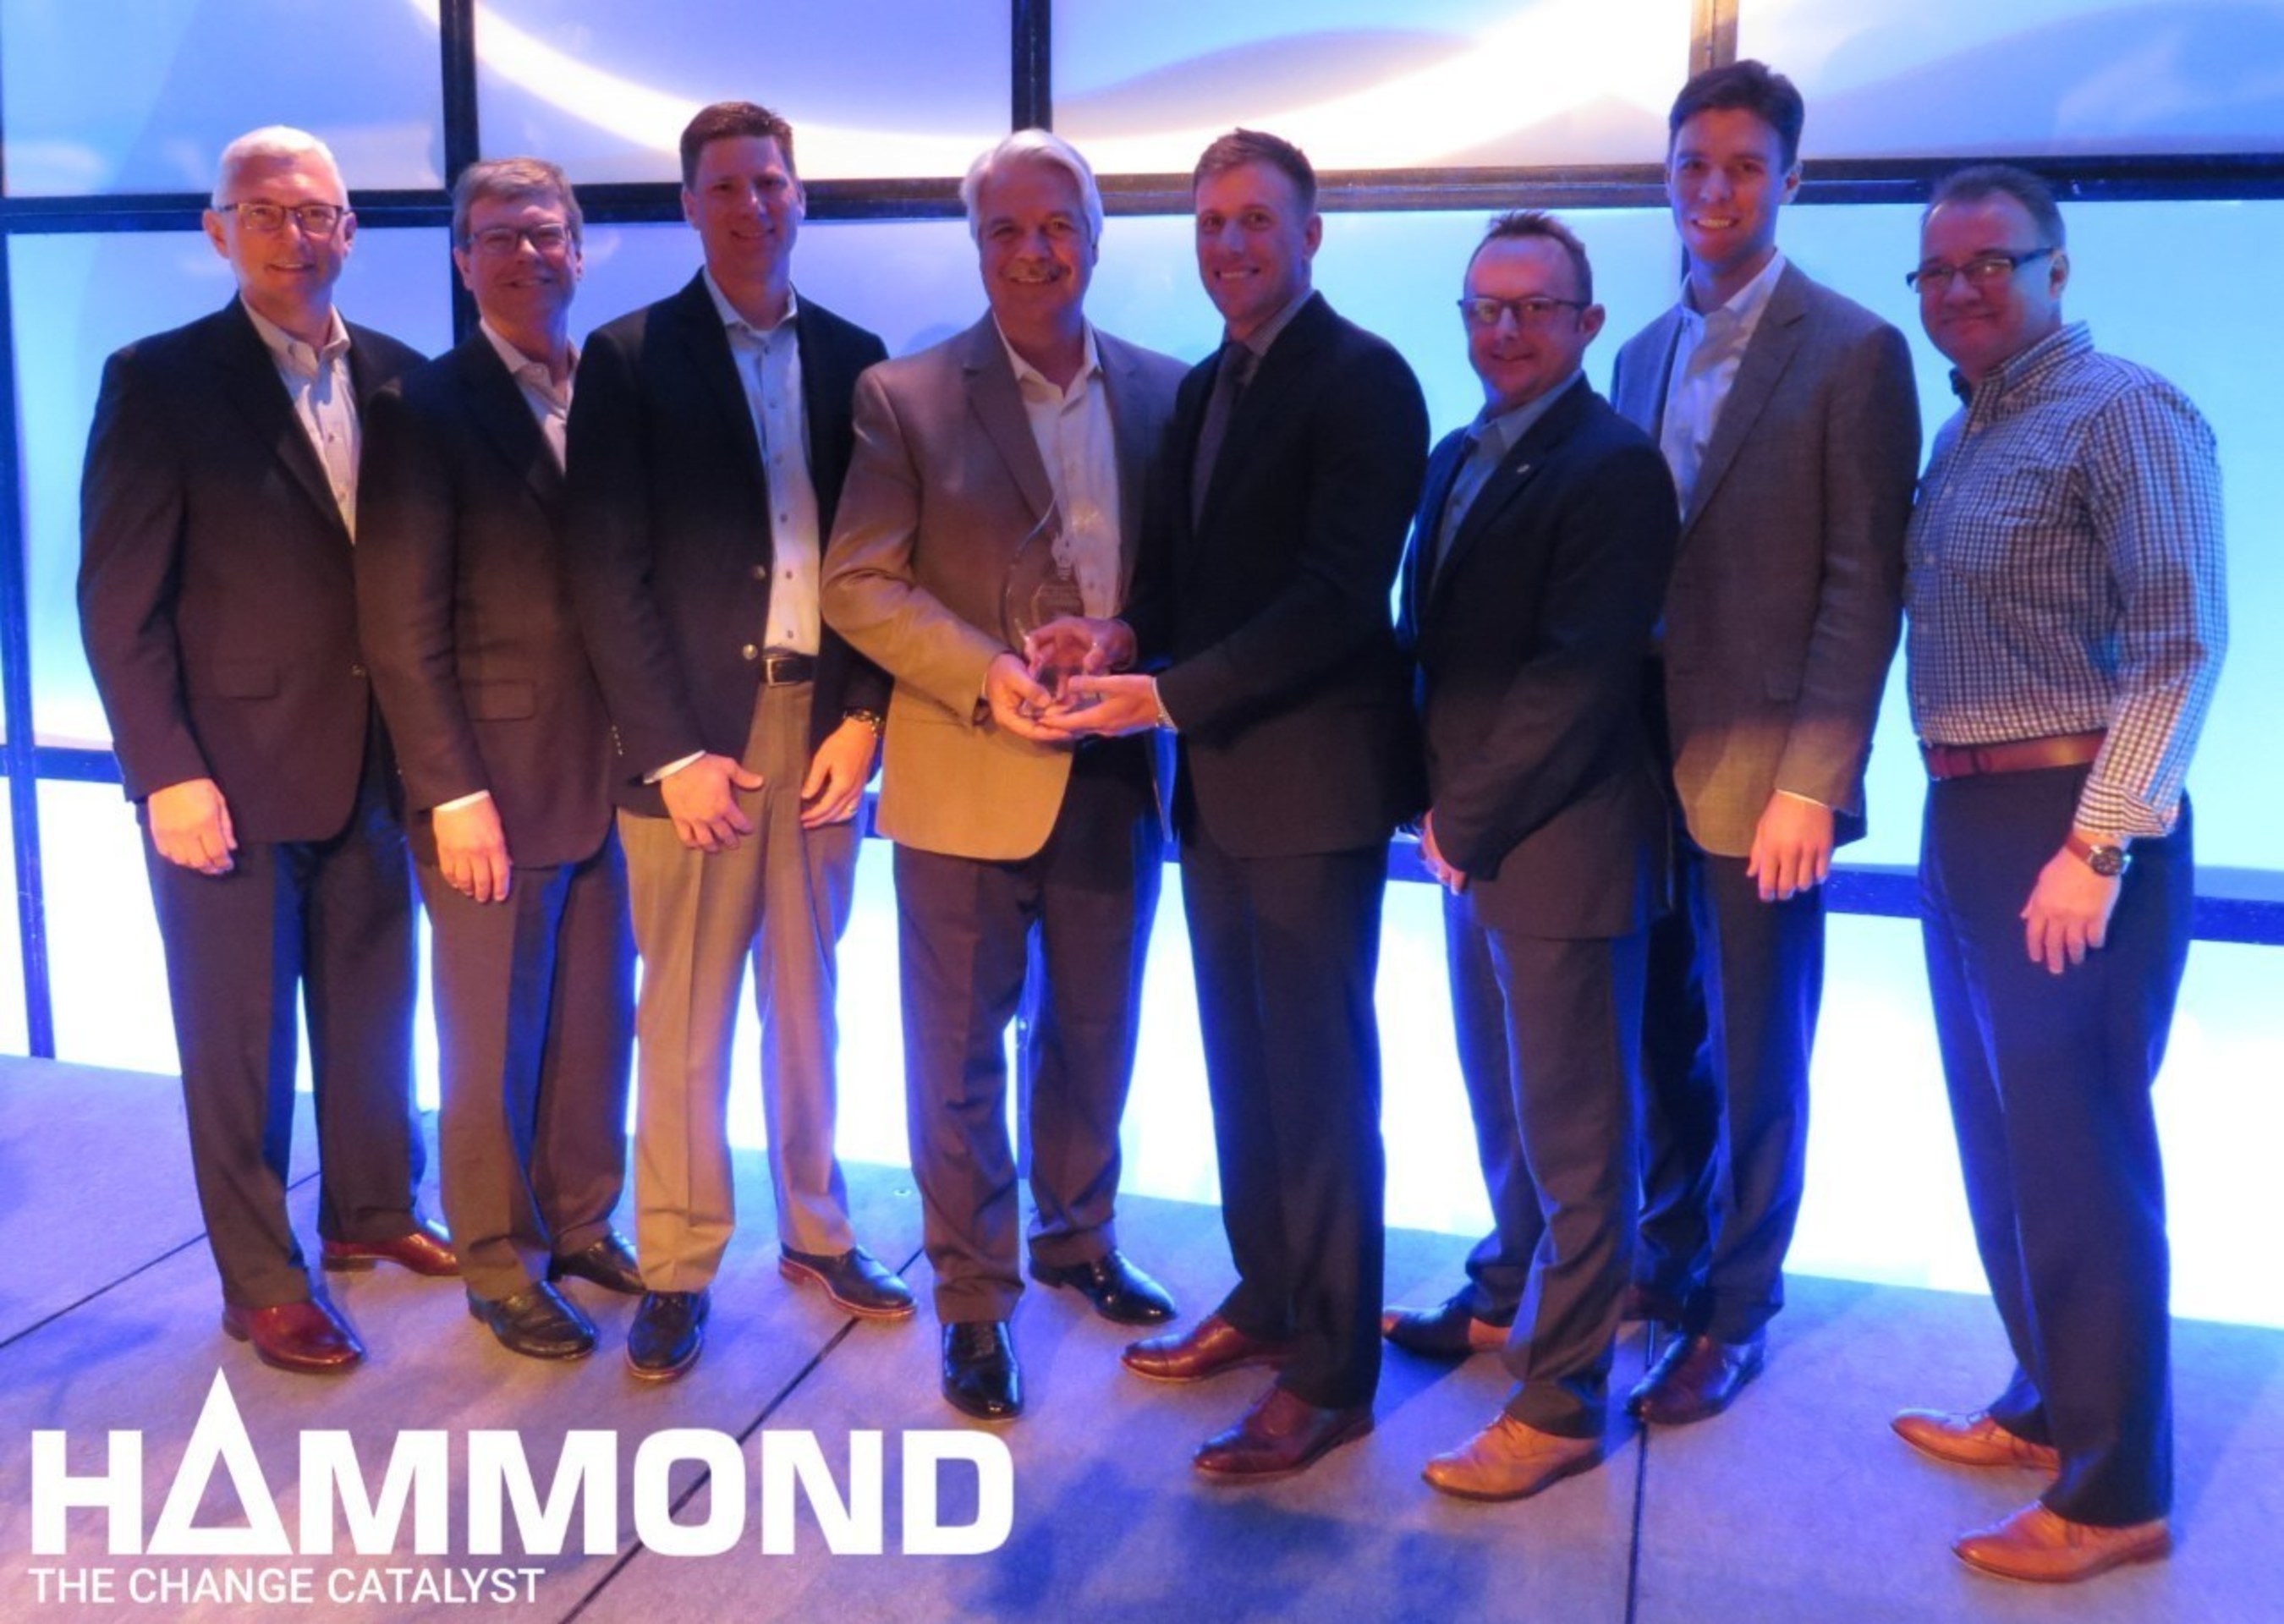 Hammond Group, Inc. receiving The Sally Breidegam Miksiewicz Innovation Award at the 2016 BCI Convention + Power Mart Expo in San Antonio, TX on May 2. Pictured from left to right; Gordon Beckley, Stephen A. Bolanowski, Eric Holtan, Terry Murphy, BCI representative, Steve Barnes, Stephen W. Bolanowski, Achim Lulsdorf